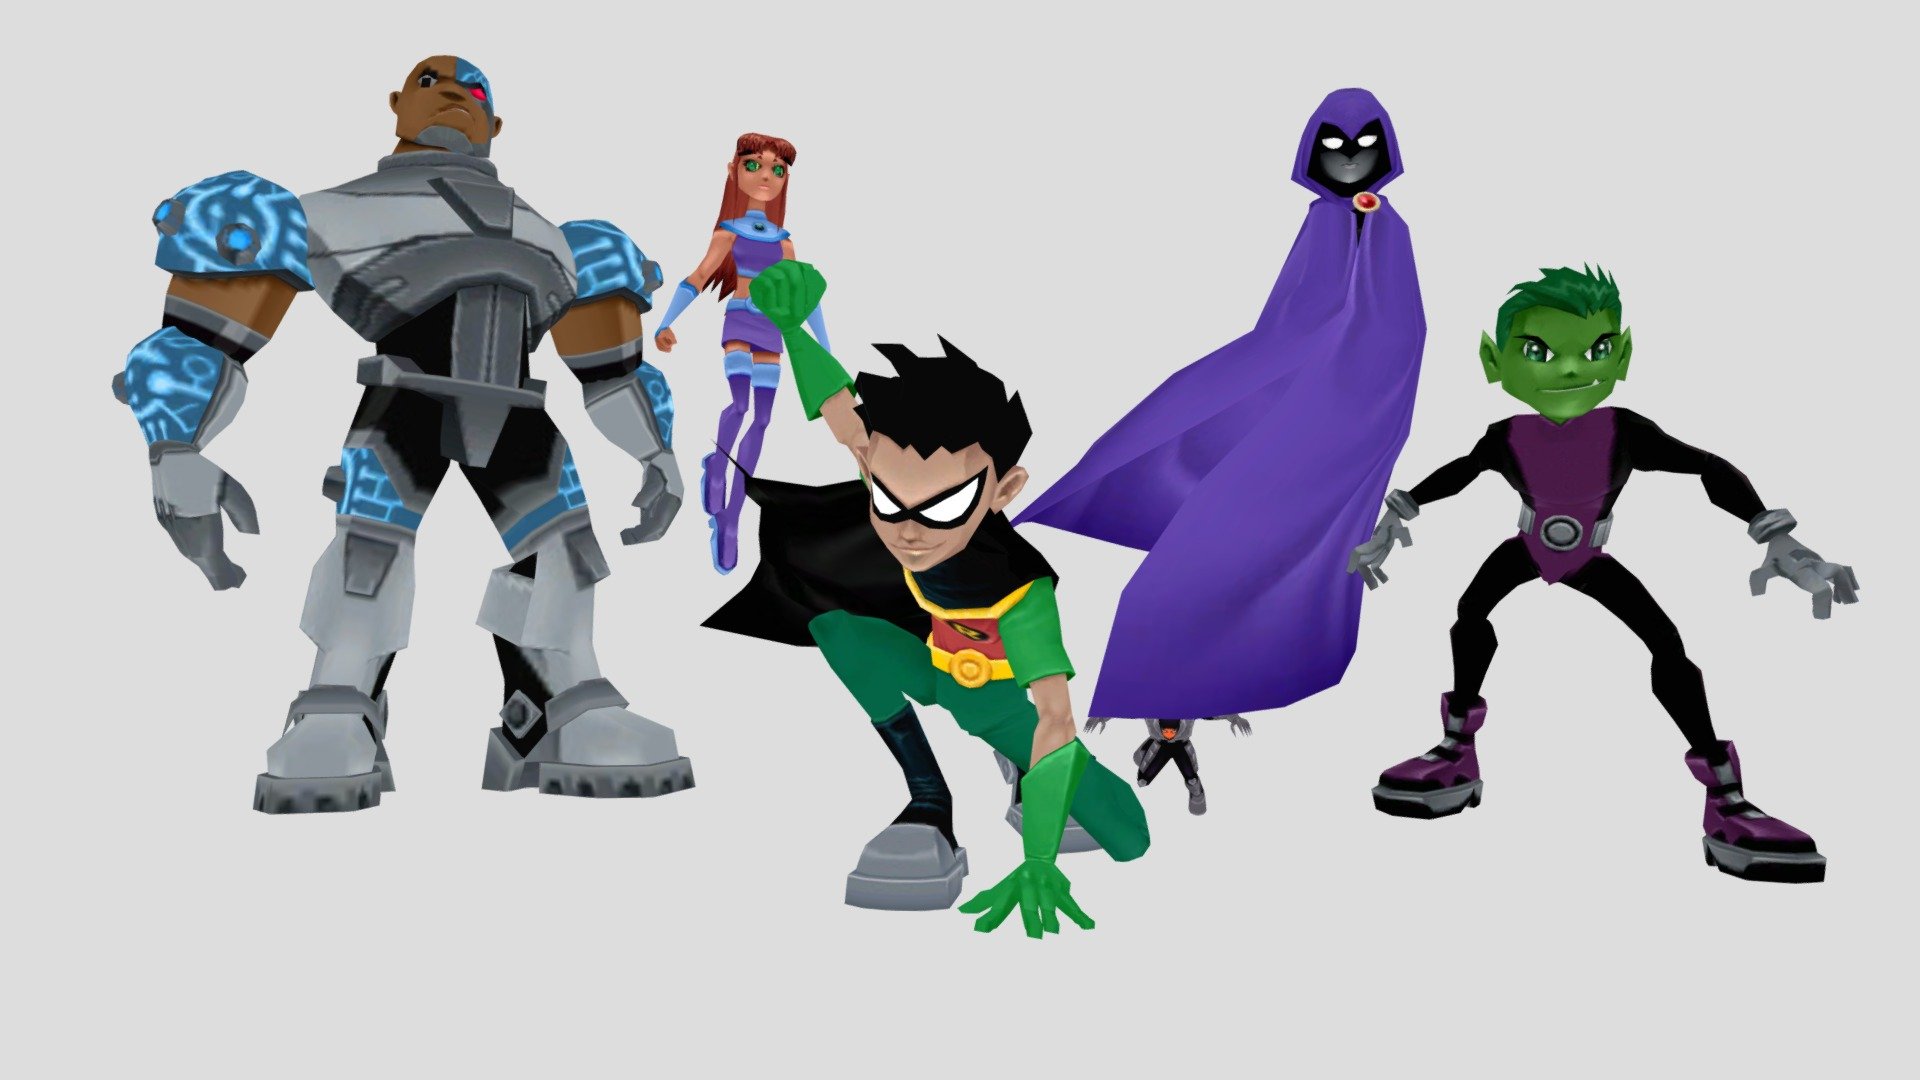 The Teen Titans - Gamecube game - Download Free 3D model by TeaSpoon  (@Theelepel) [8d34560]